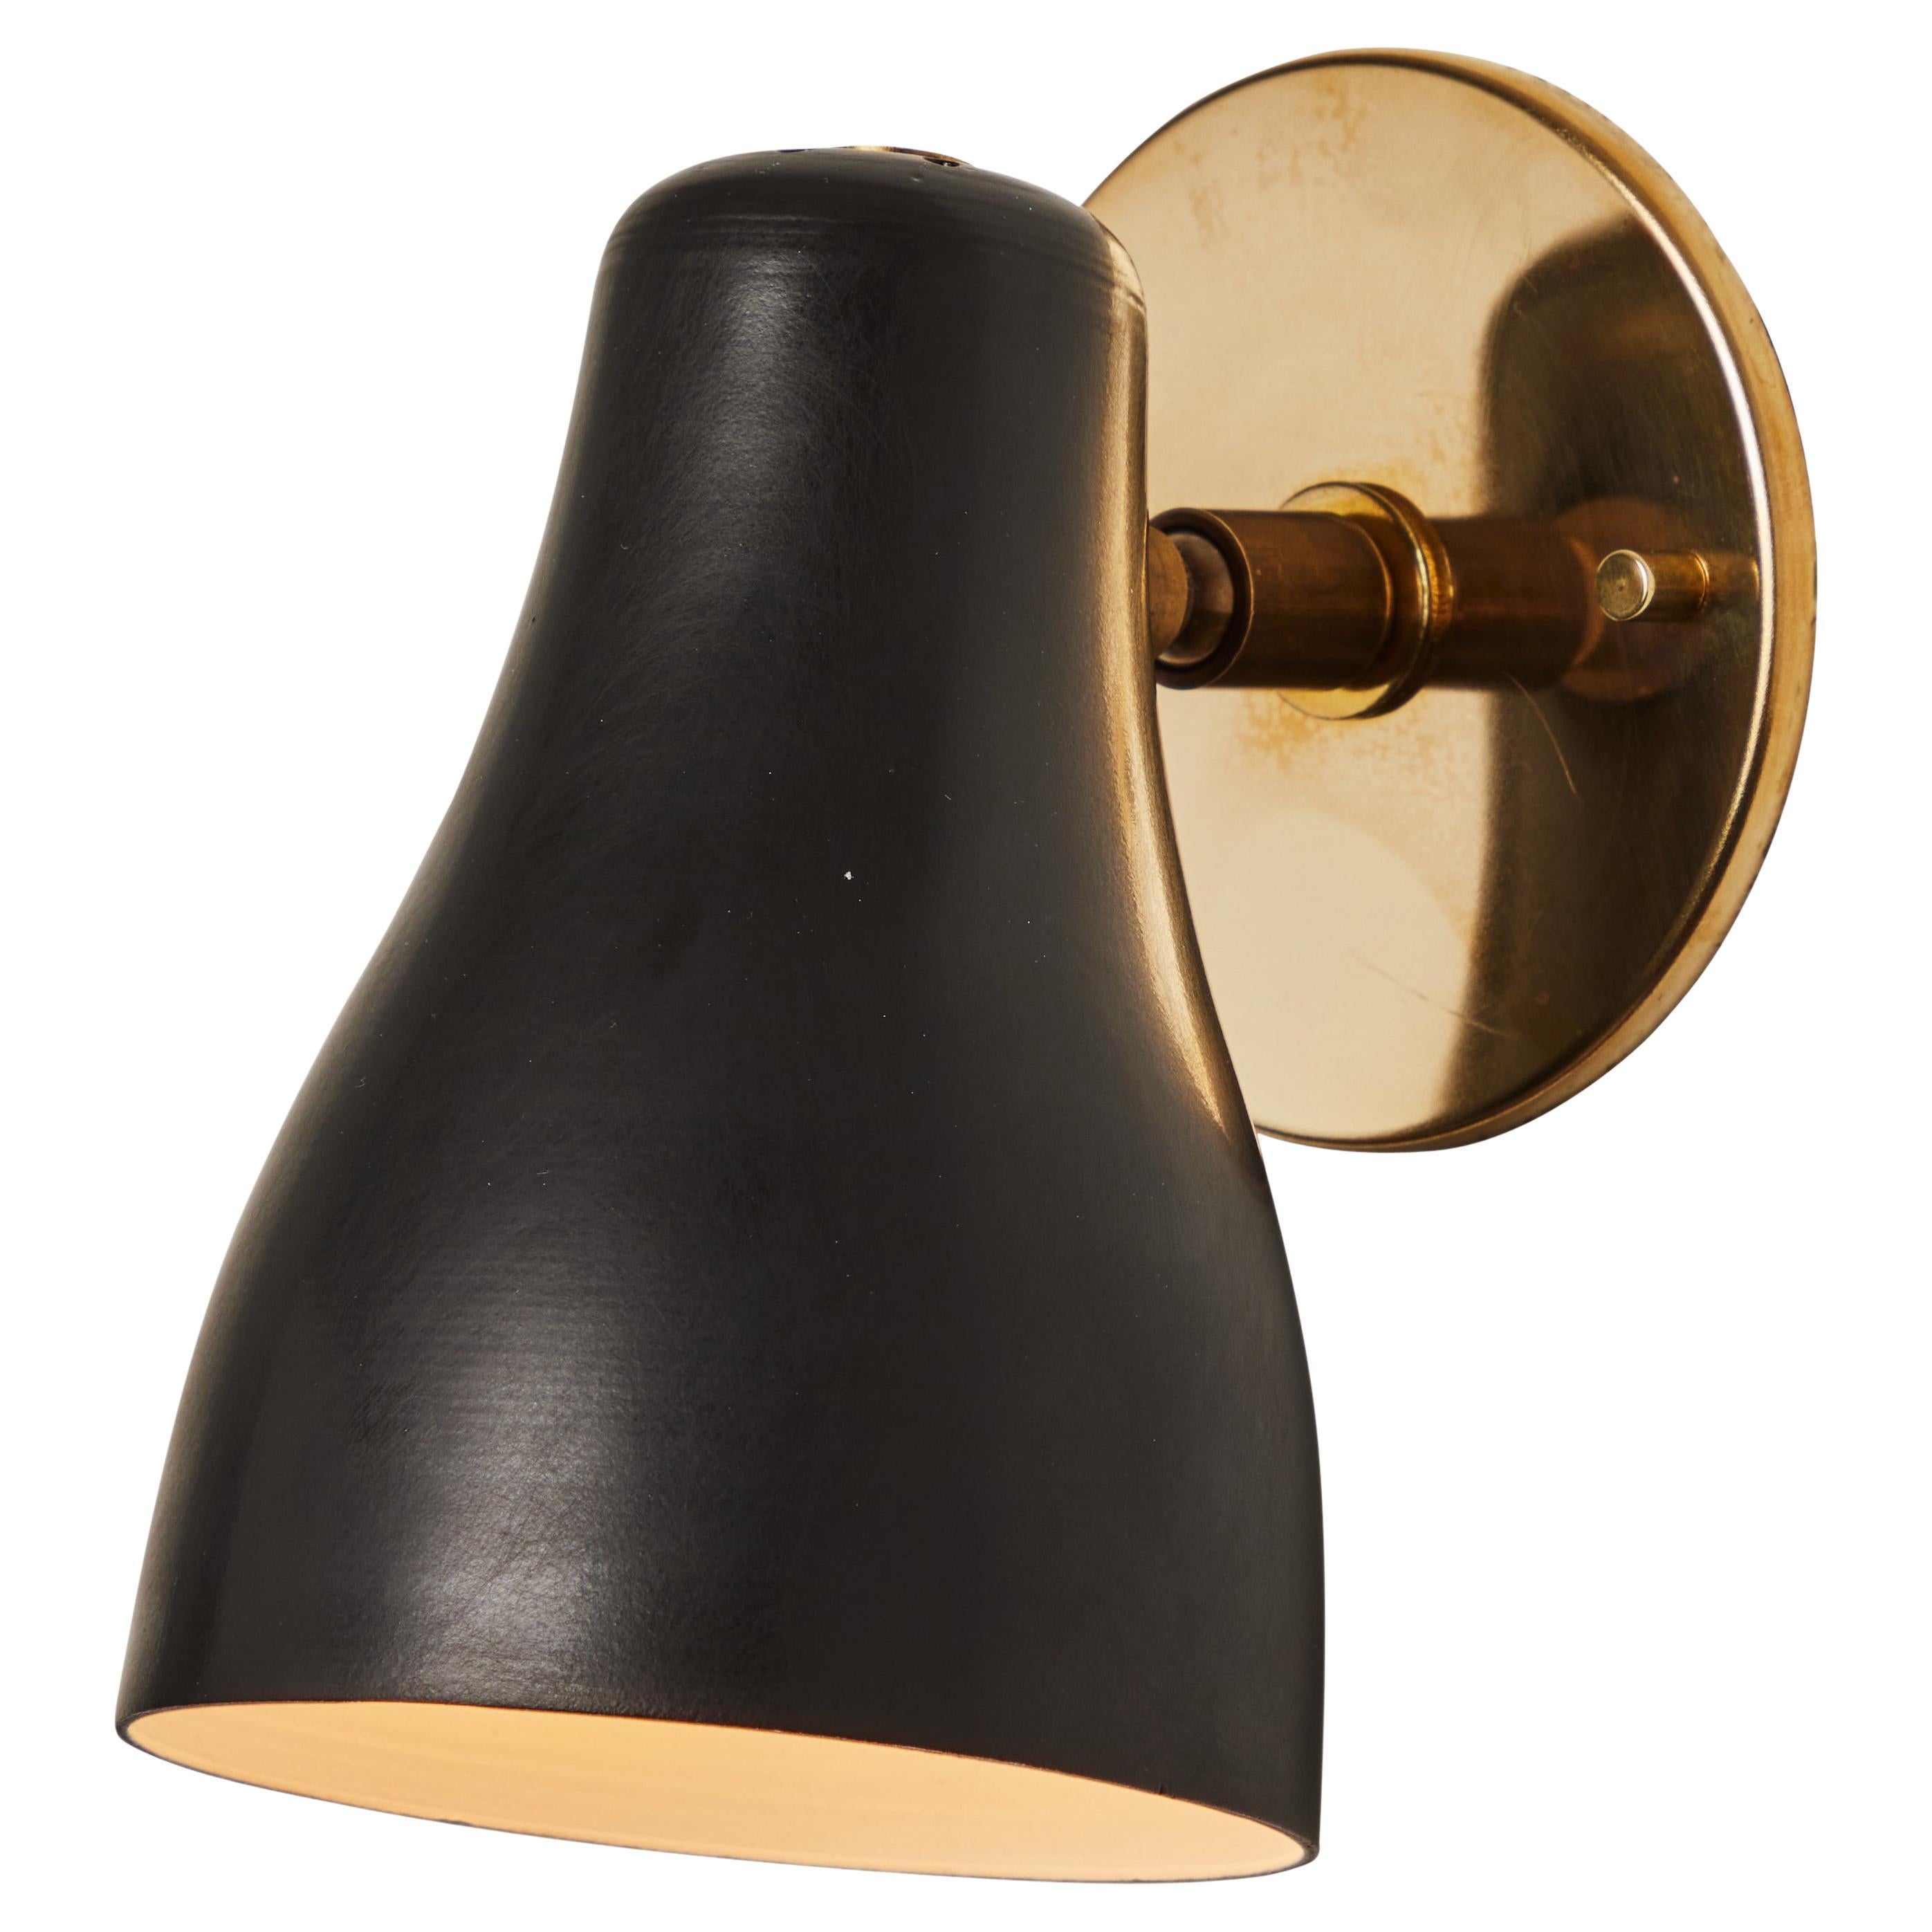 Pair of 1960s black and brass wall lamps attributed to Jacques Biny. 

An exceptionally clean and simple design executed in brass with a black metal shade. Lamp rotates freely on adjustable swivel. Quintessentially midcentury French in its